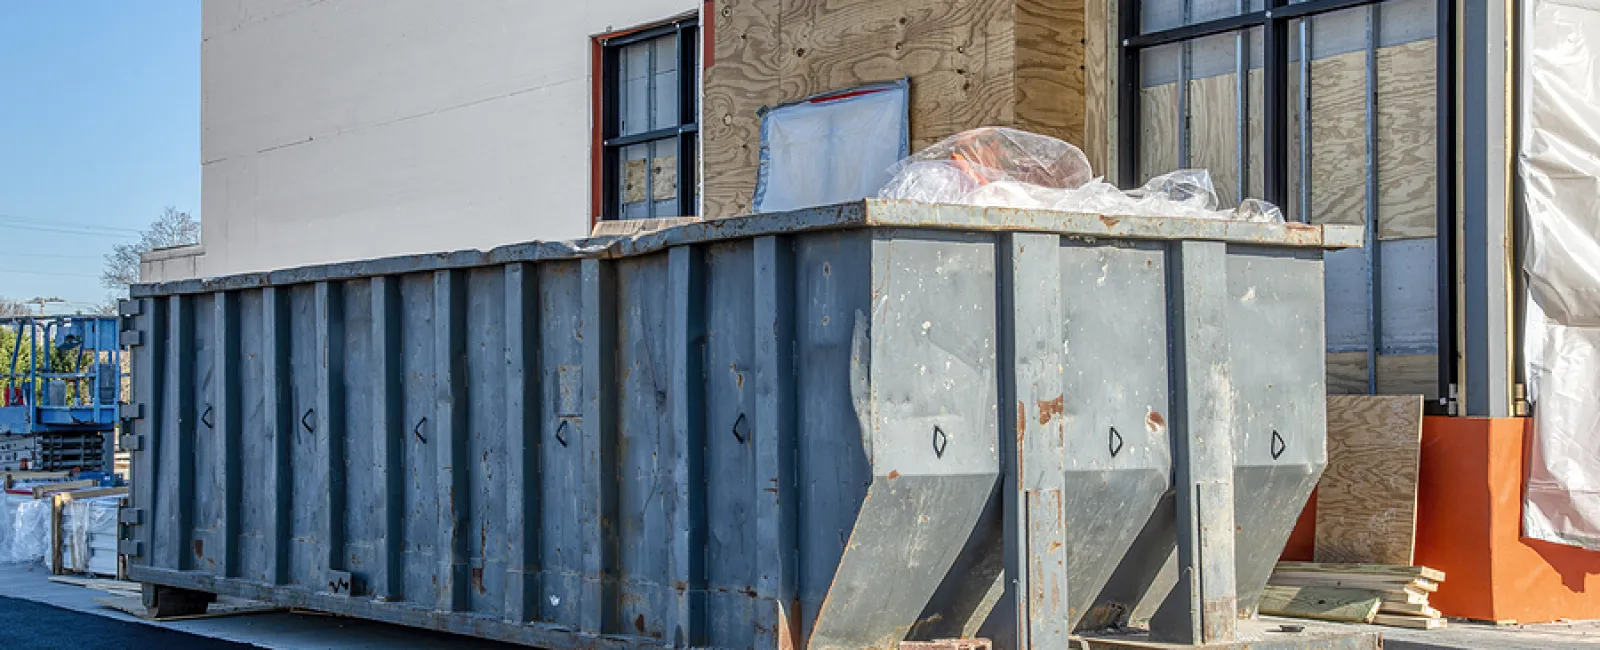 Illegal Commercial Waste Dumping: New Penalties and How to Report 